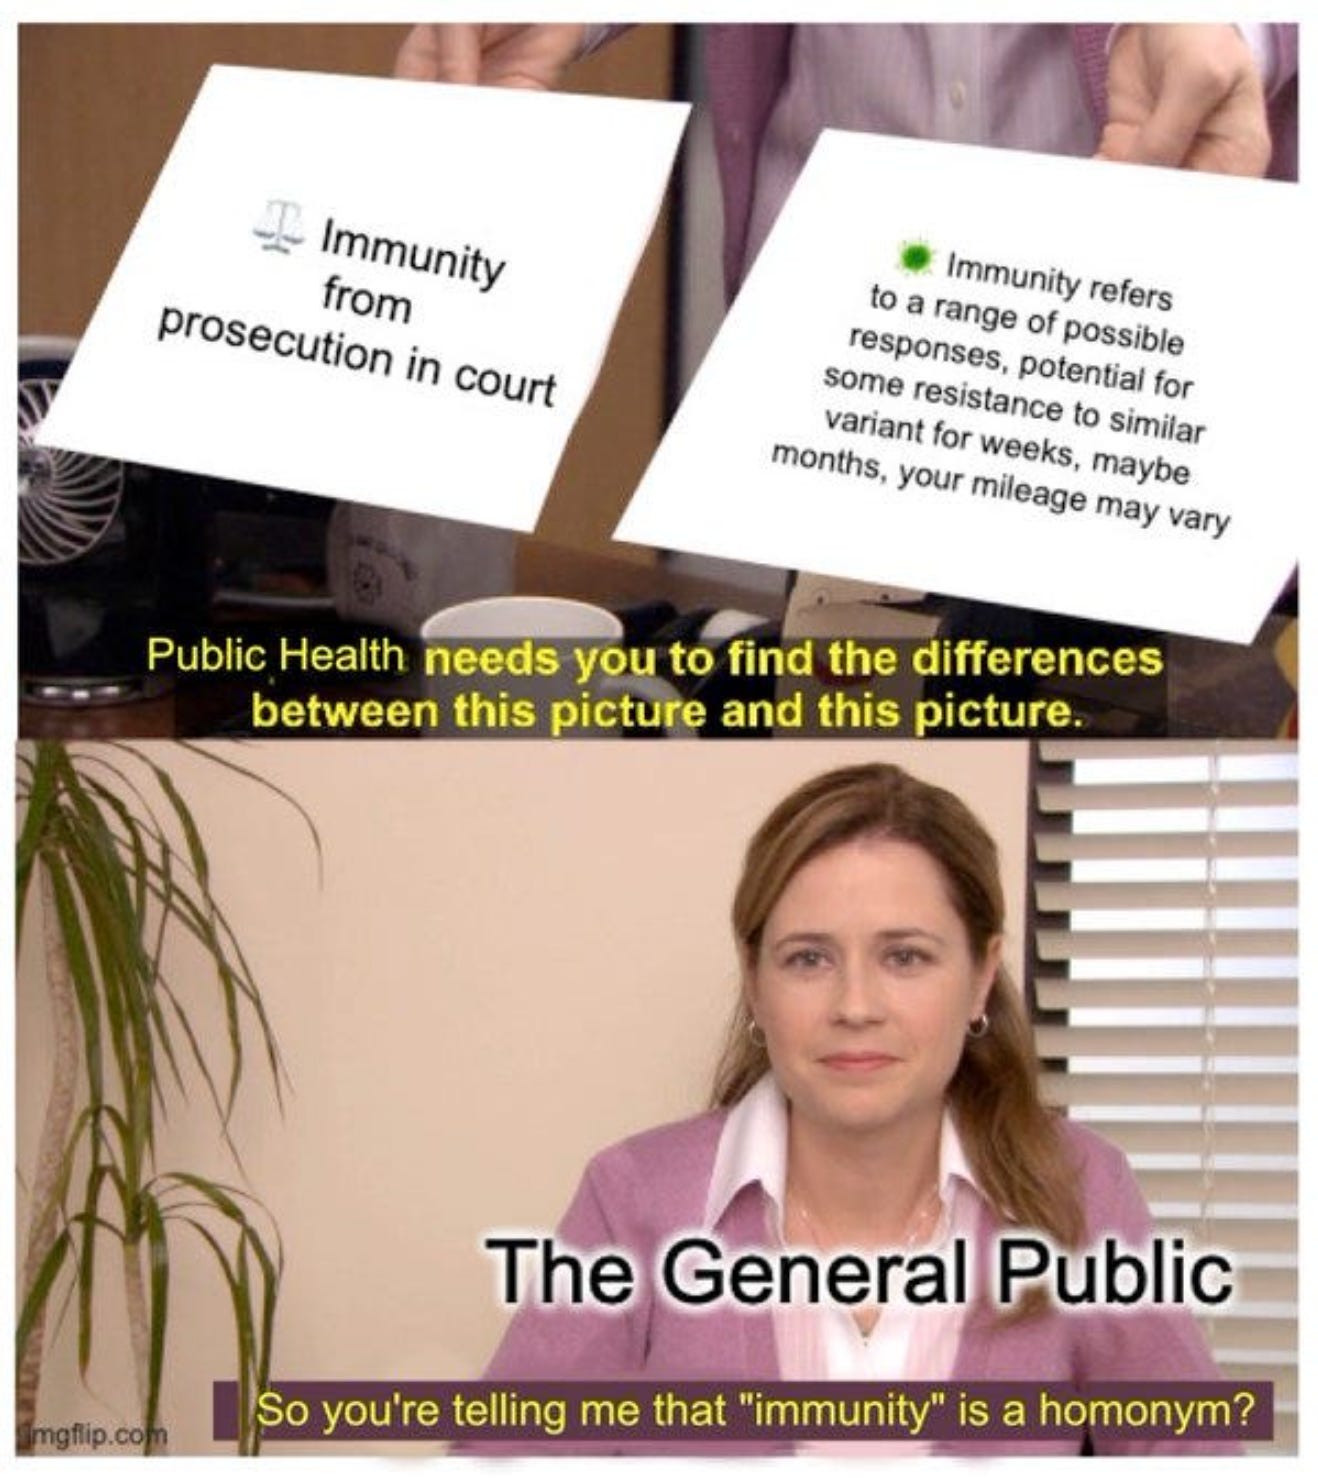 They’re the same picture meme from The Office. The top image has 2 sheets of paper, on one it says Immunity from prosecution in court, in the other it says Immunity refers to a range of possible responses, potential for some resistance to similar variant for weeks, maybe months, your mileage may vary. The caption says Public Health needs you to find the differences between this picture and this picture. The woman in the picture below is labeled The General Public and she says, So you're telling me that "immunity" is a homonym?